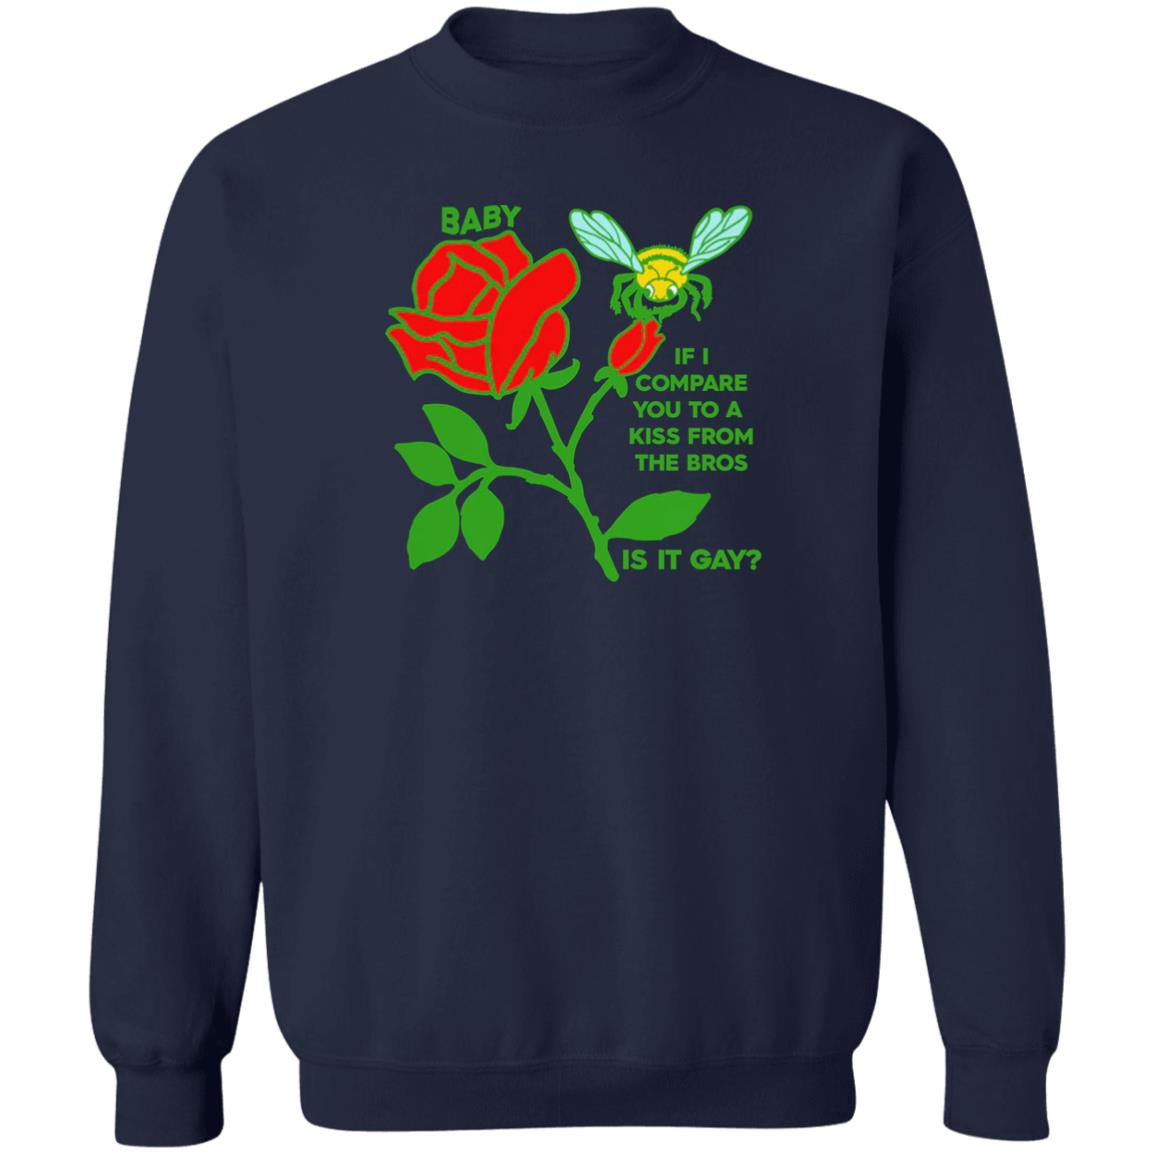 Shirts That Go Hard Goodshirts Store If I Compare You To A Kiss From A Rose Is It Gay Shirt